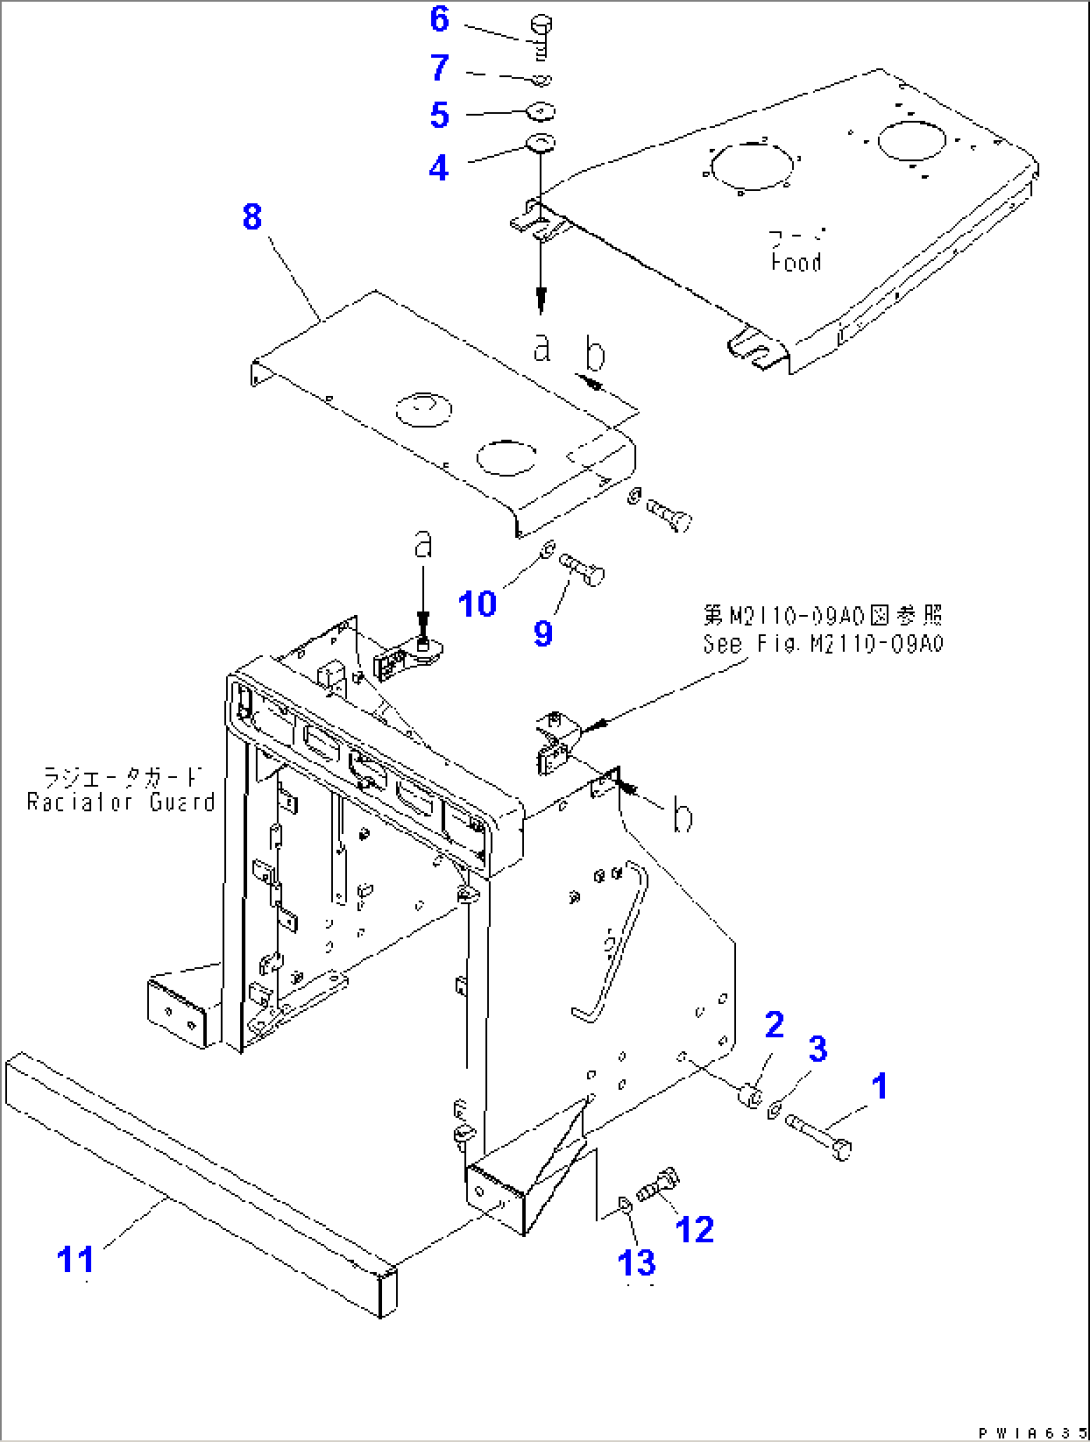 RADIATOR GUARD RELATED PARTS